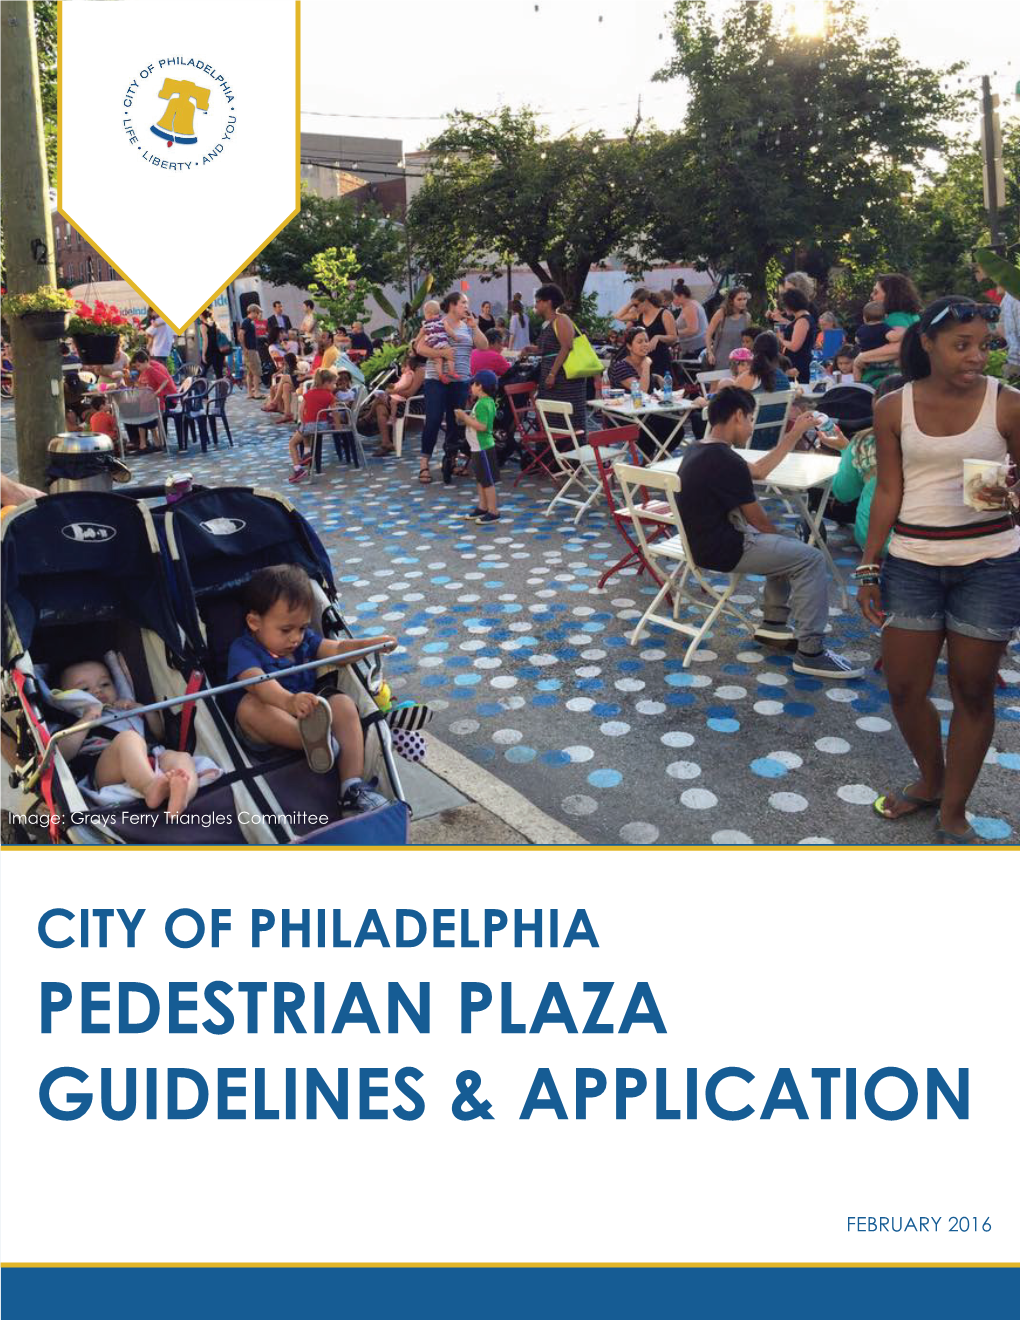 Pedestrian Plaza Guidelines & Application